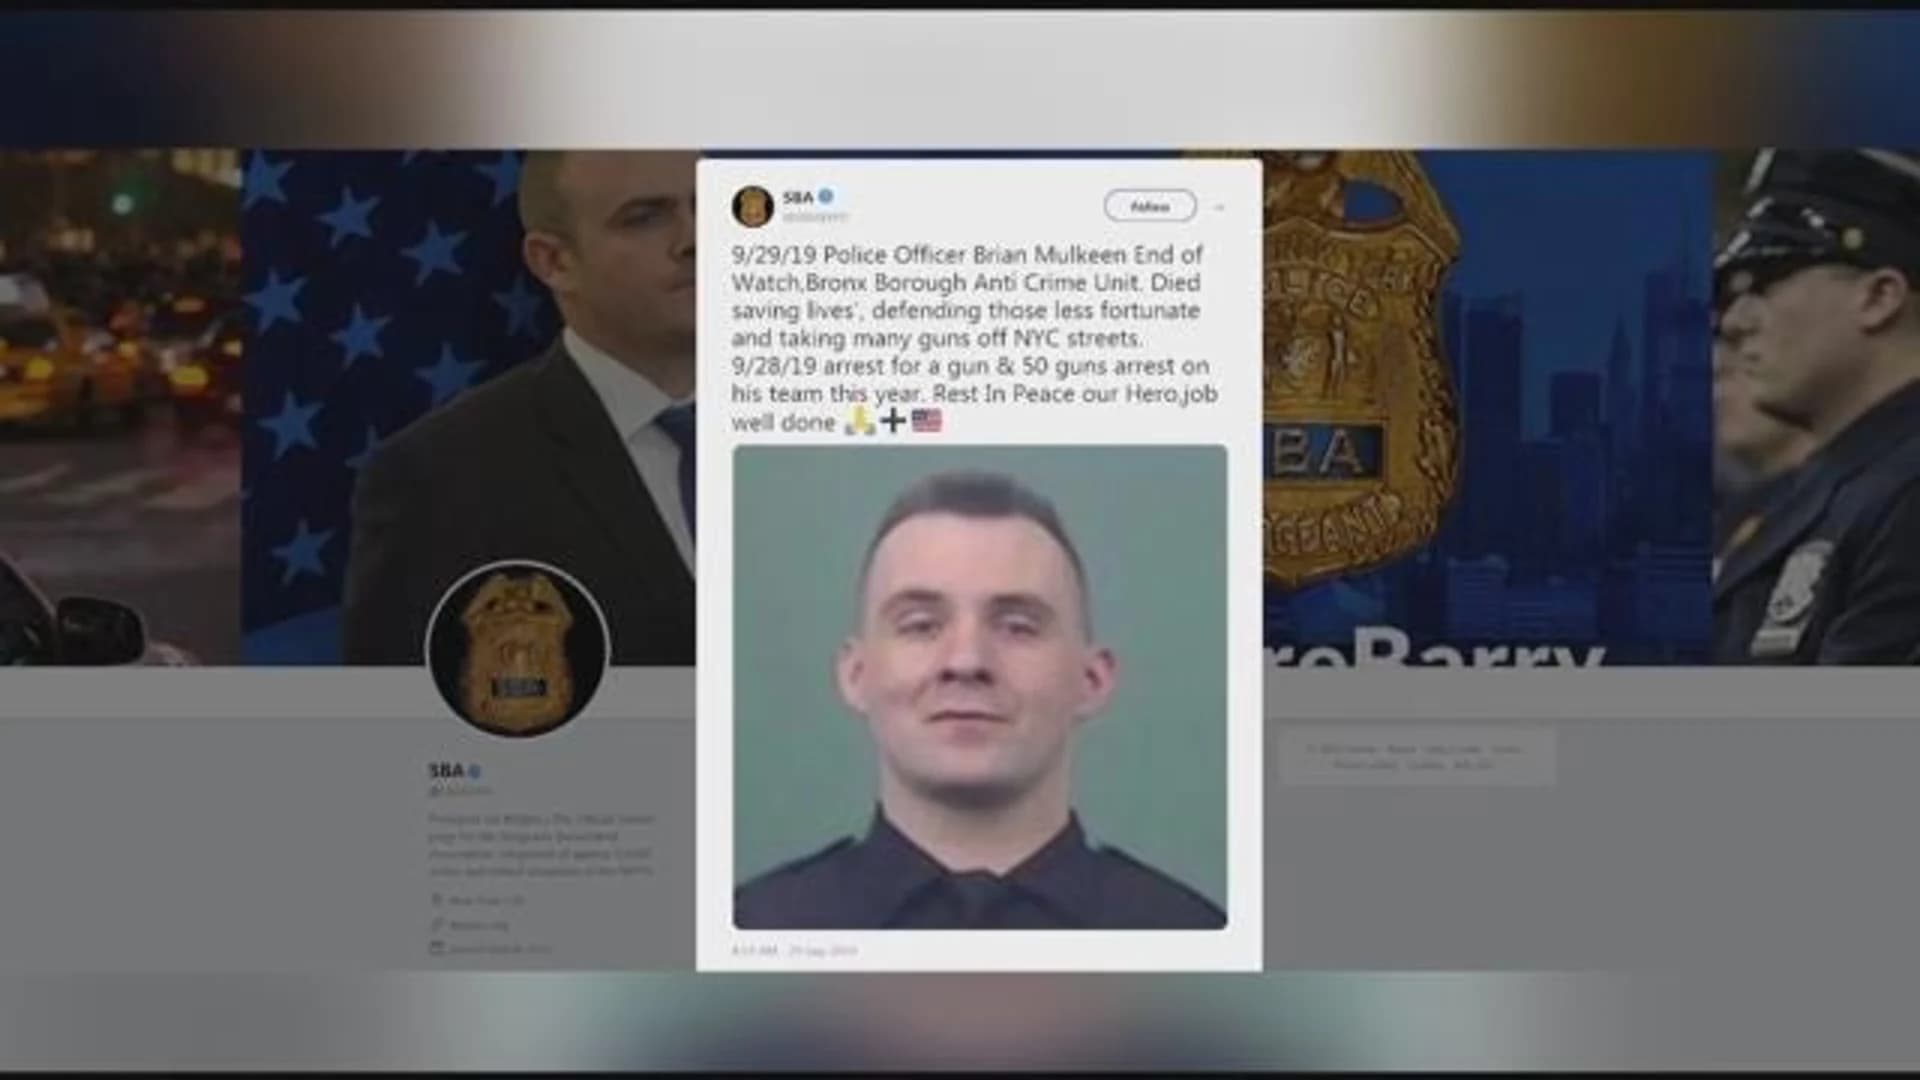 'A true hero': Community mourns death of NYPD officer slain in the Bronx